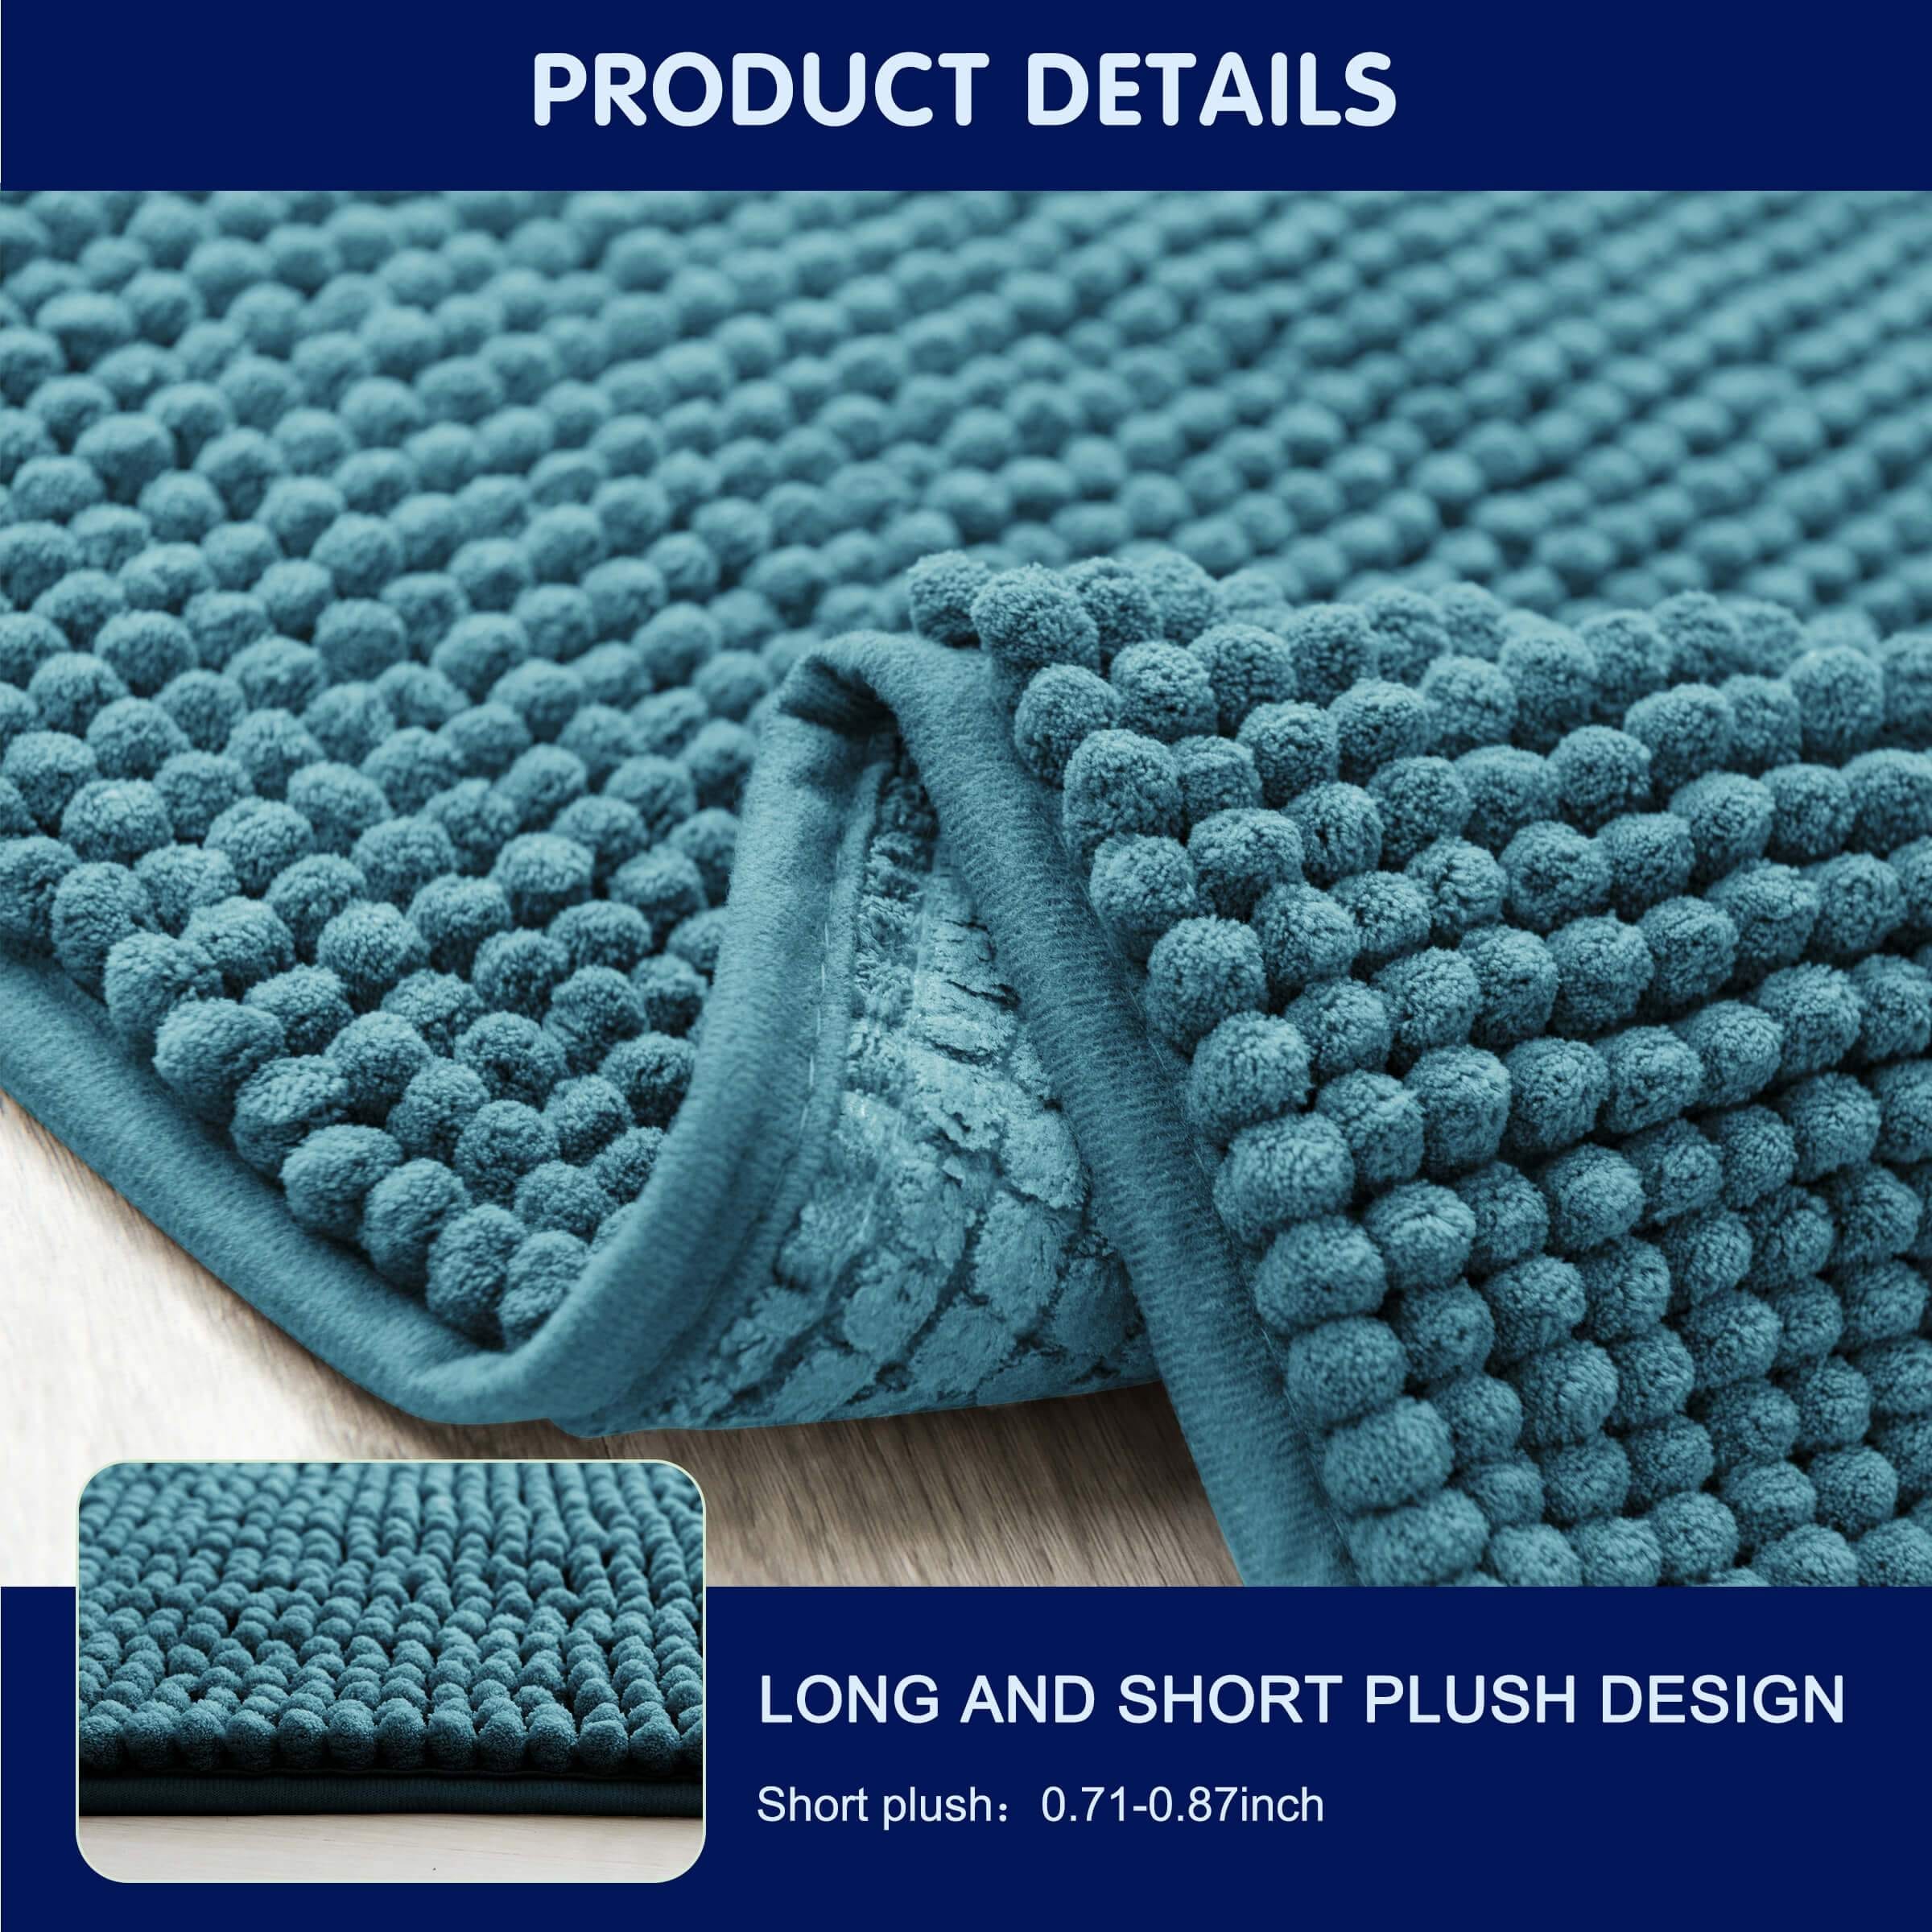 https://ak1.ostkcdn.com/images/products/is/images/direct/d1d76bc3947defc0a2f53639719e60f397c8175f/Subrtex-Chenille-Bathroom-Rugs-Soft-Super-Water-Absorbing-Shower-Mats.jpg